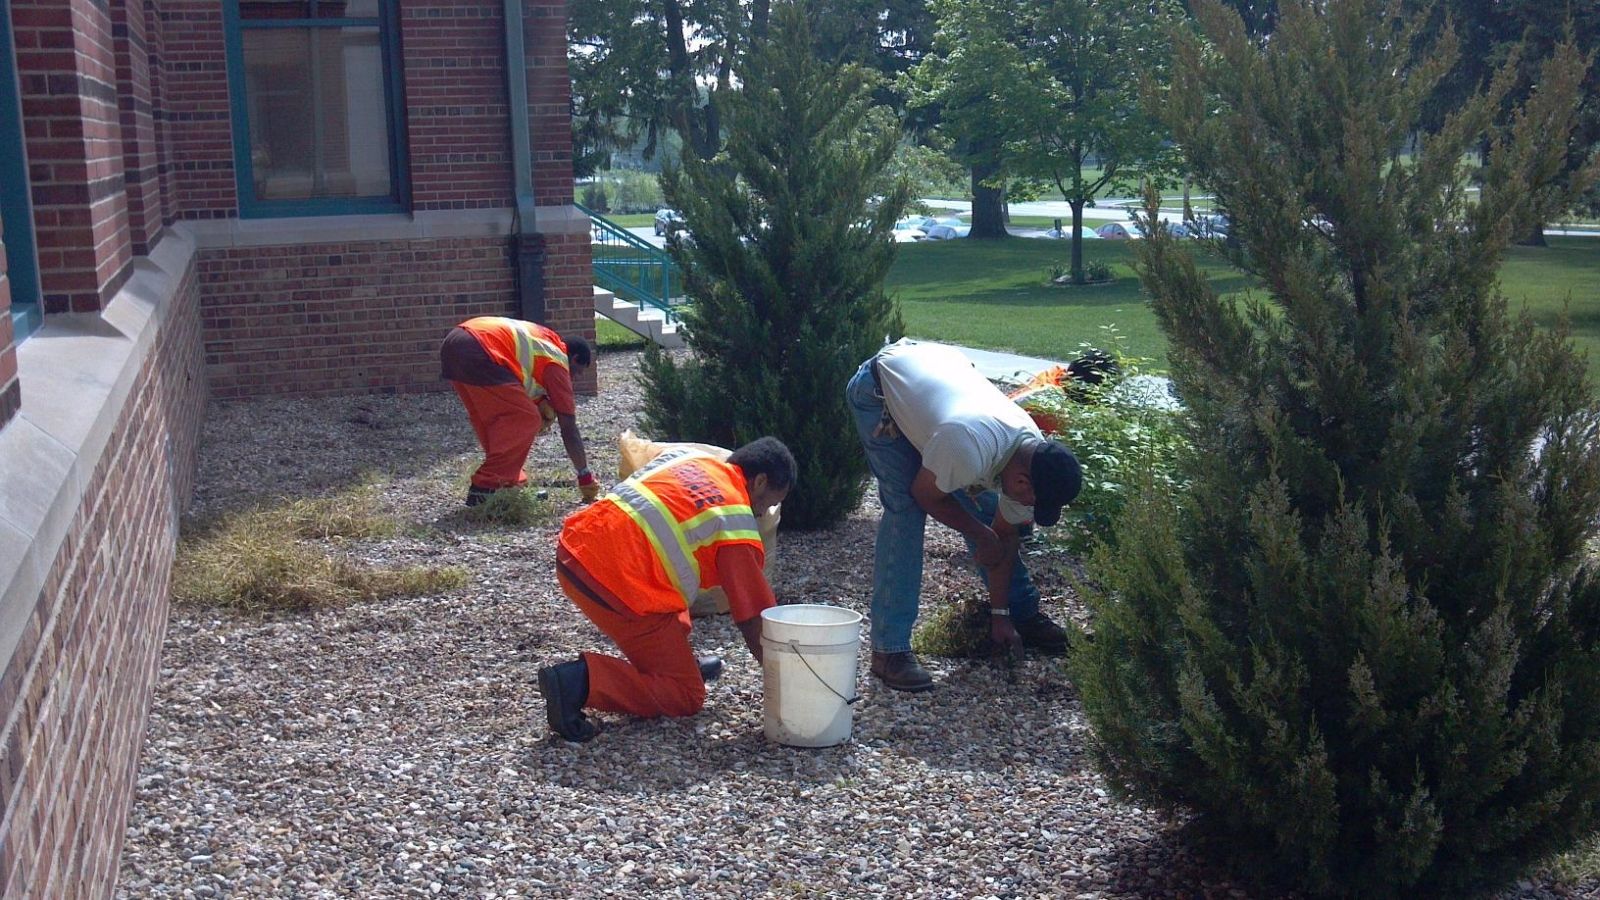 Inmates weeding outside in a group